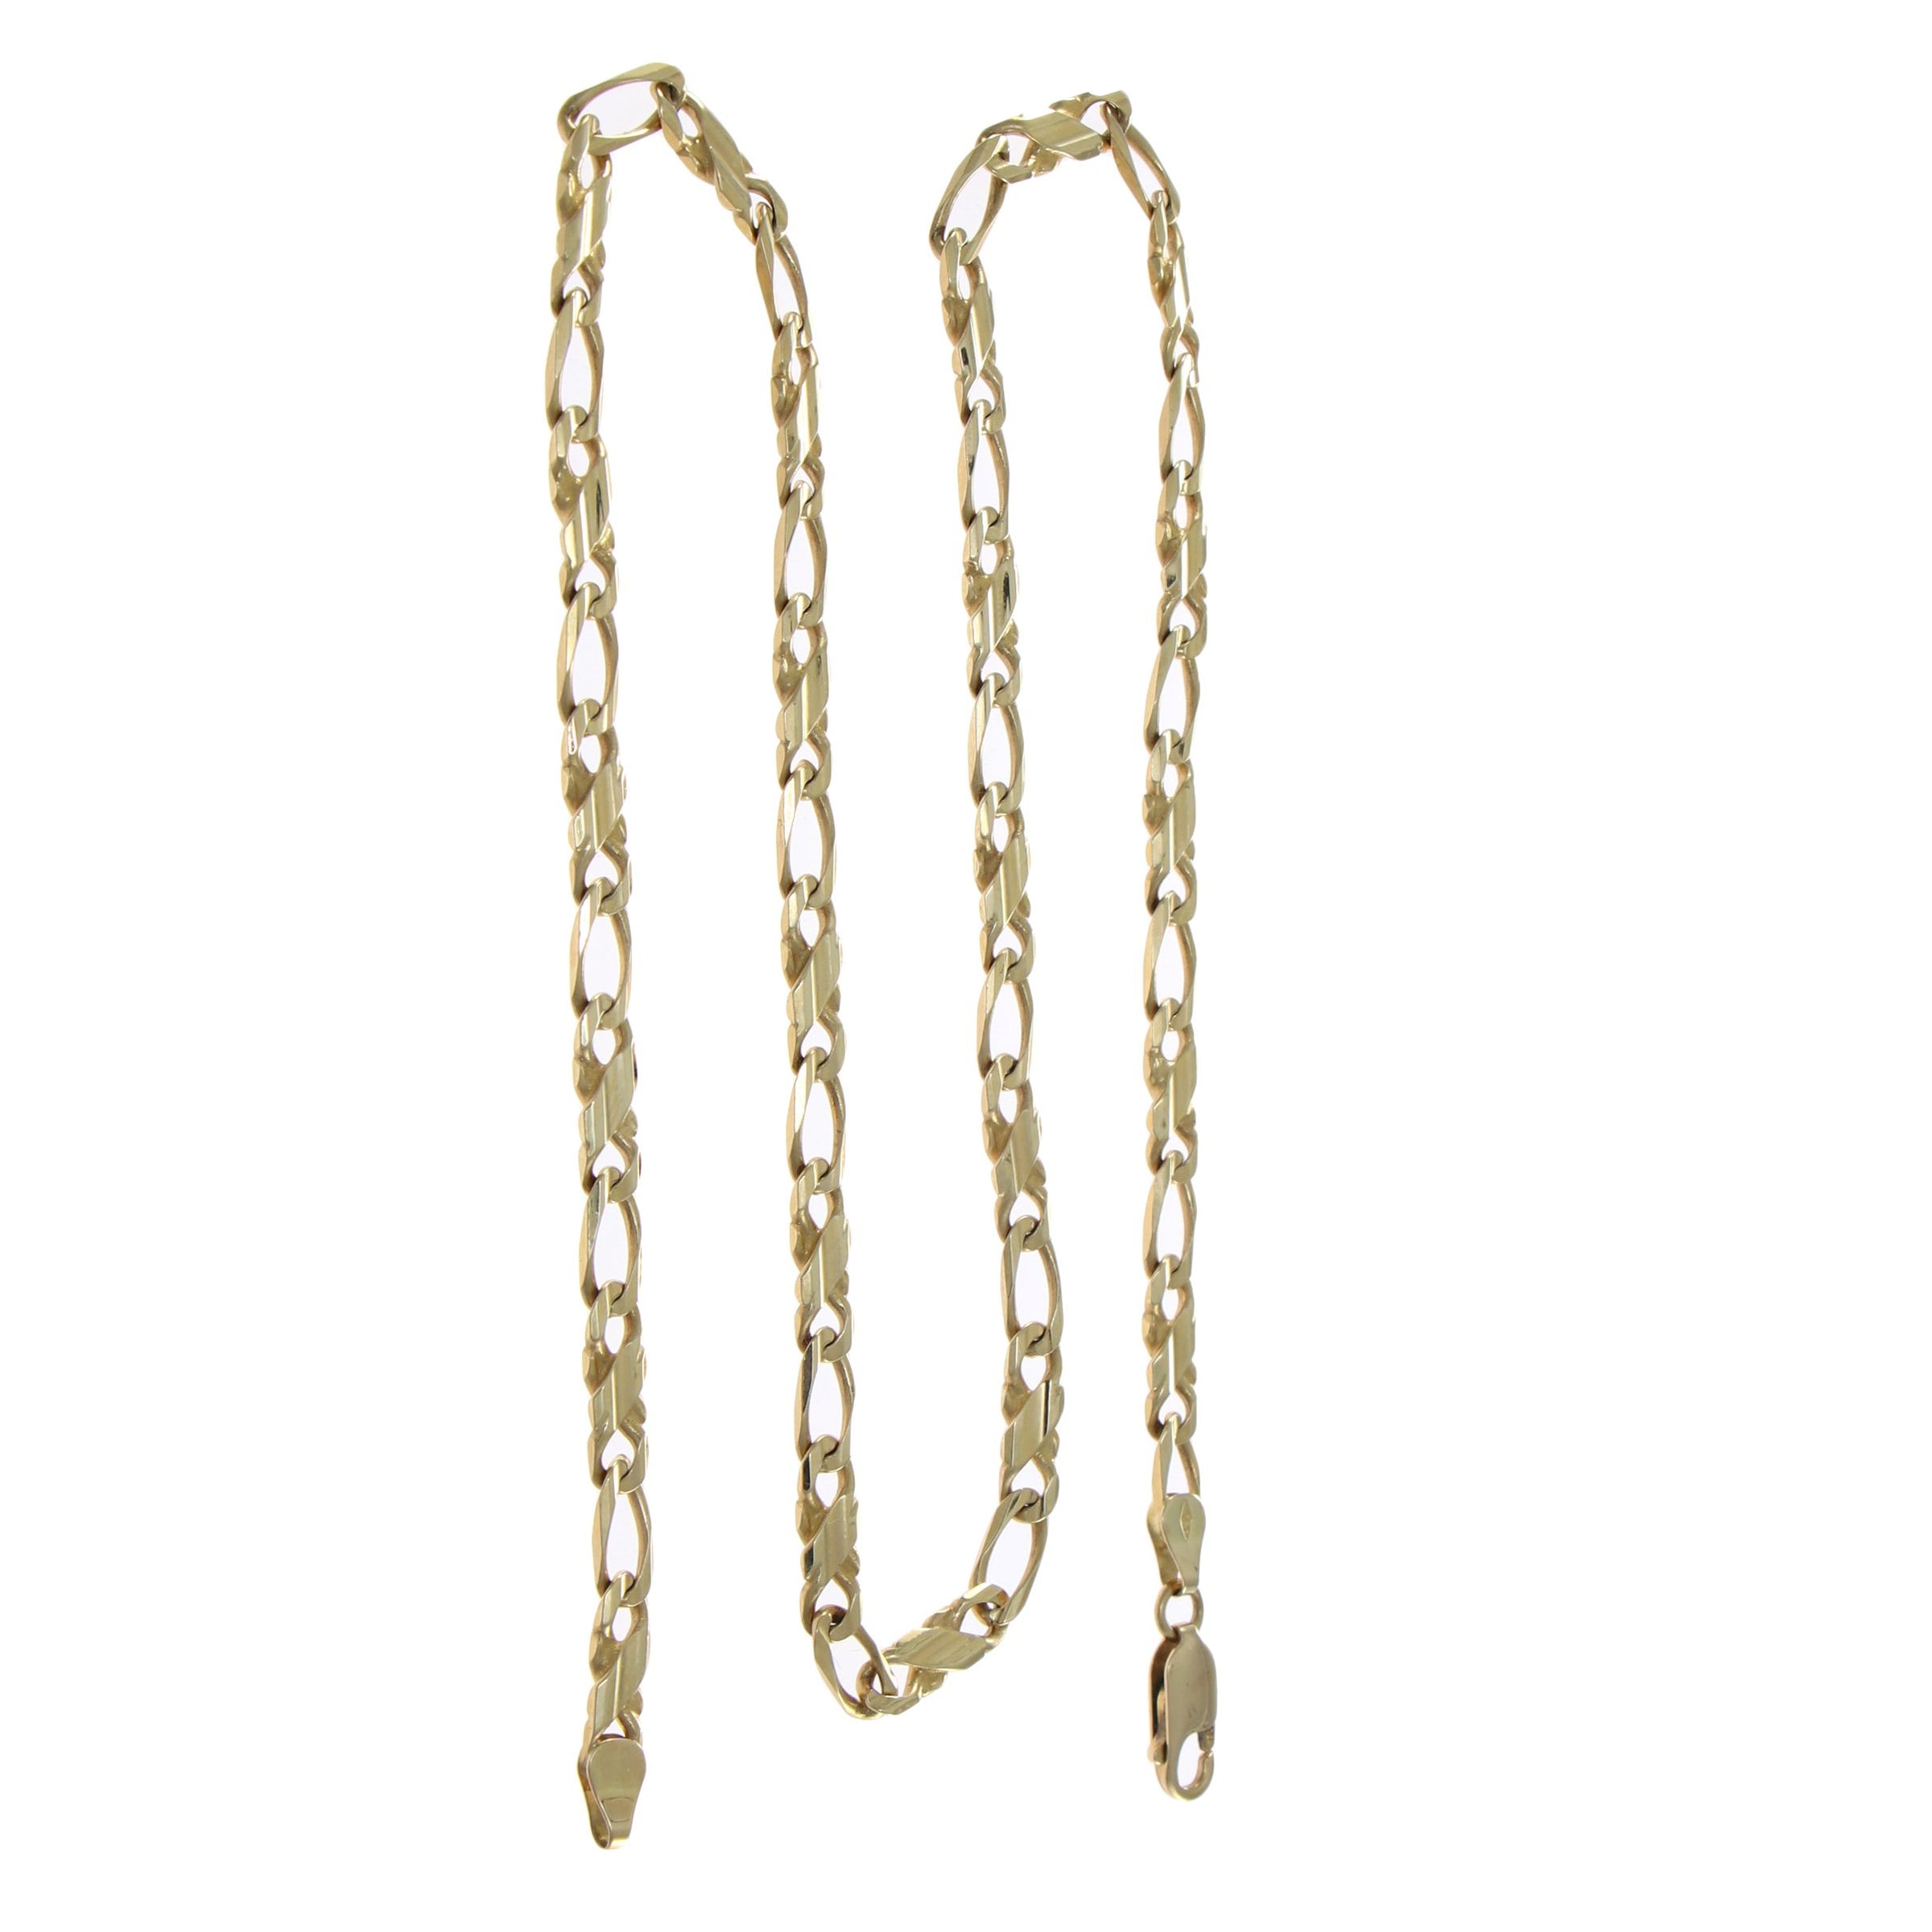 14K Large Link Open Figaro Chain, 14K Yellow